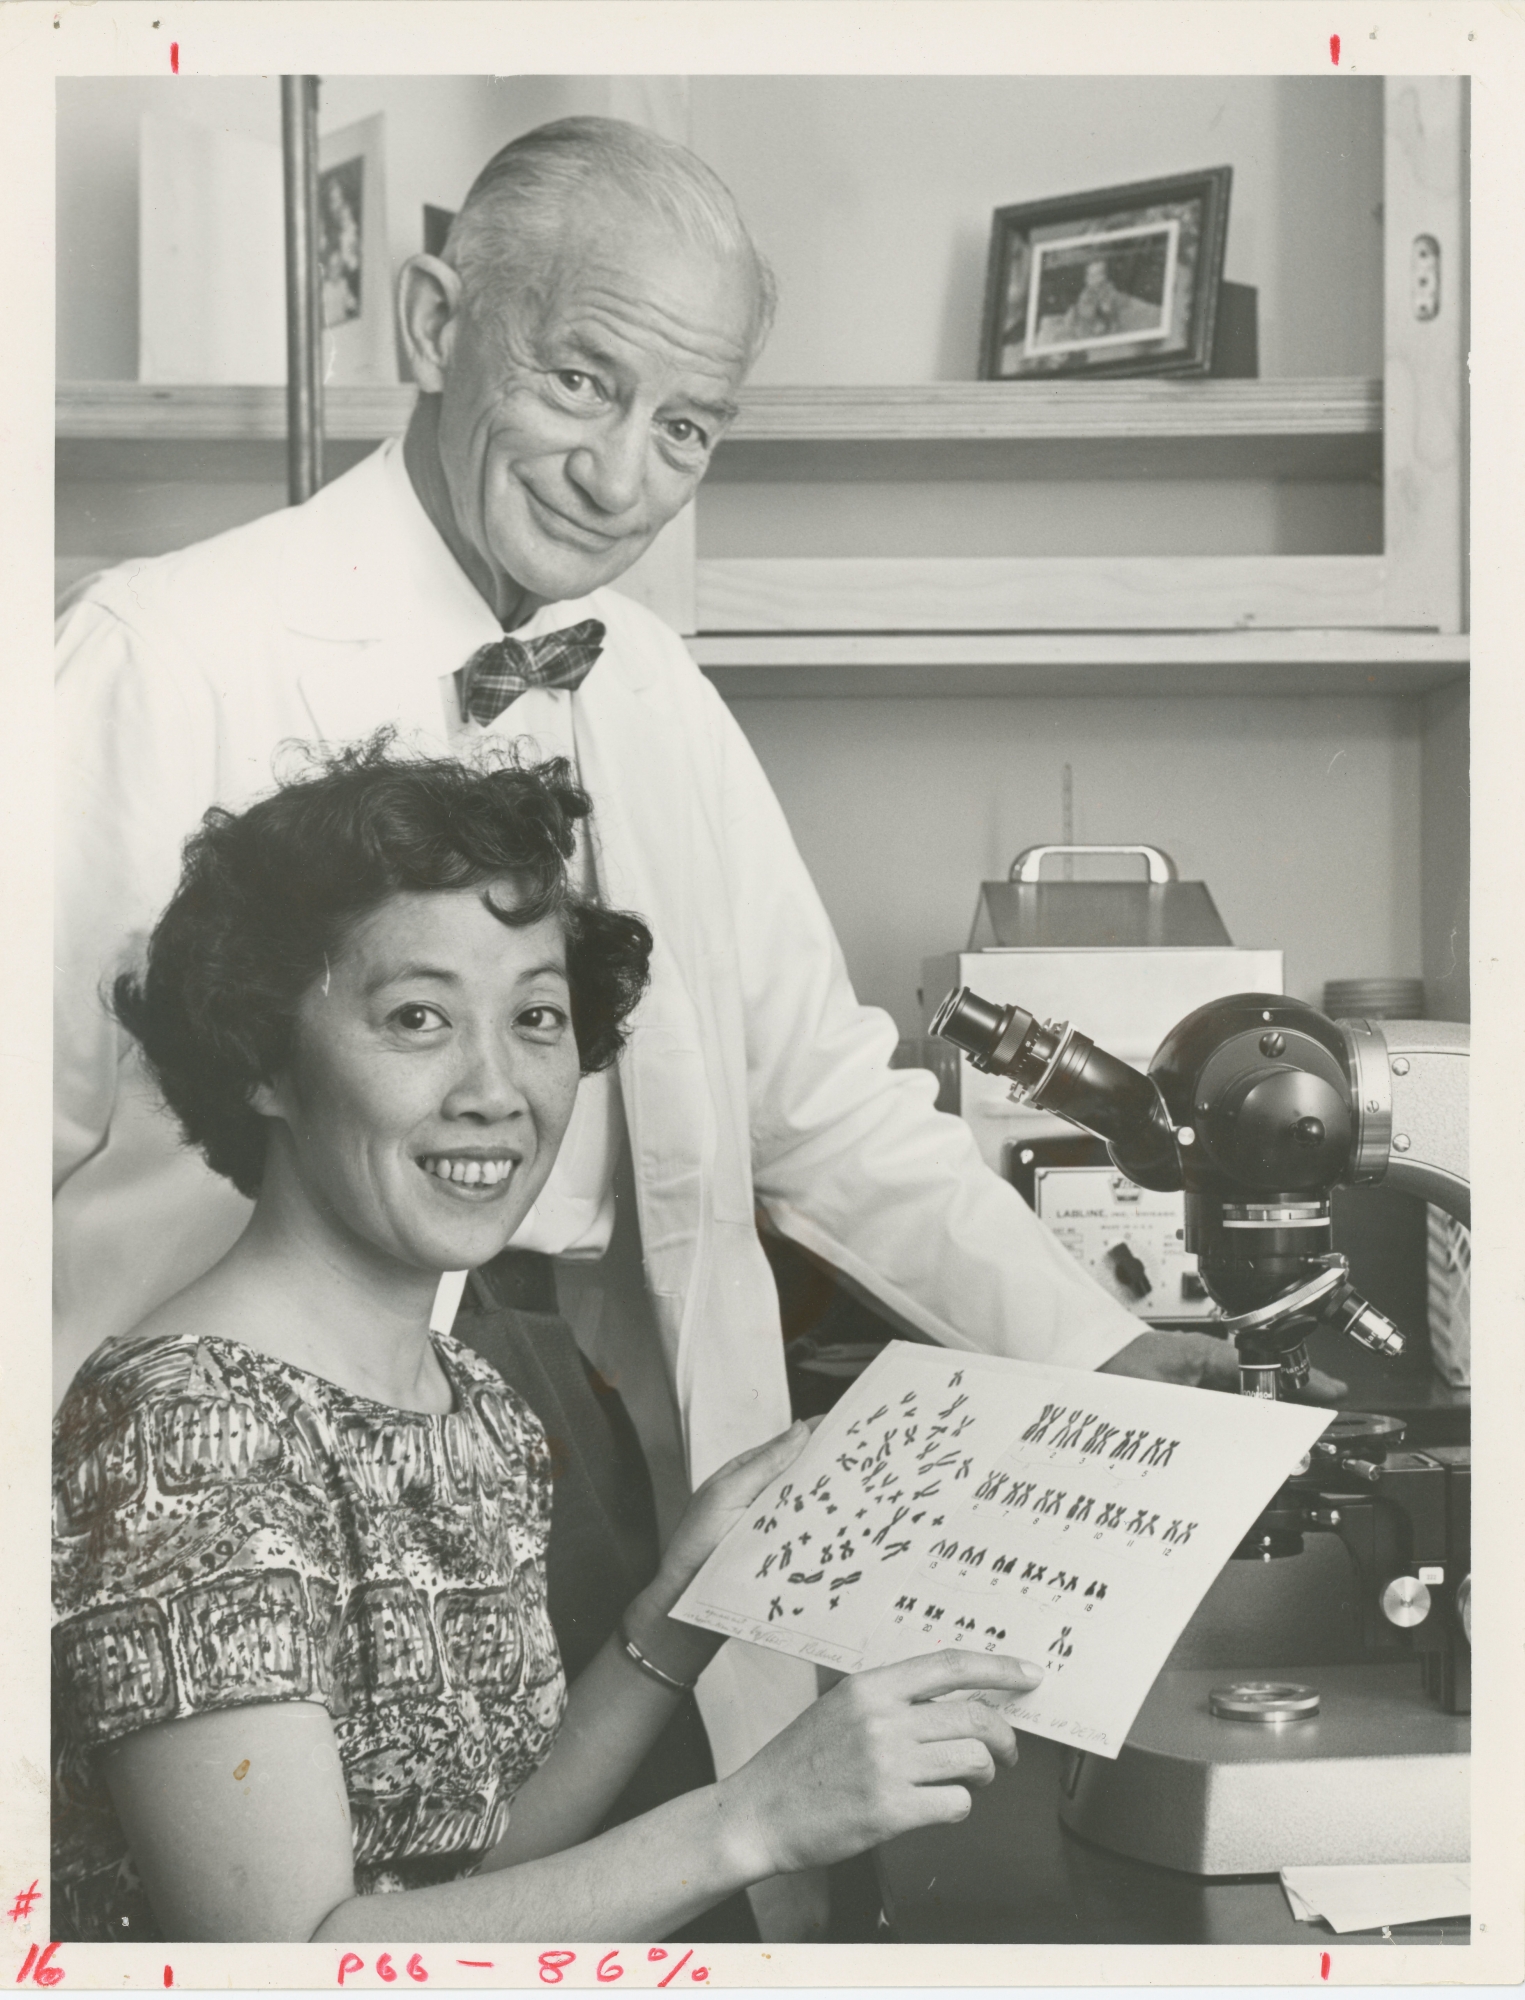 Dr. Bruce Chown worked with Irene Uchida, who was hired in 1960 as director of medical genetics at the Children's Hospital..